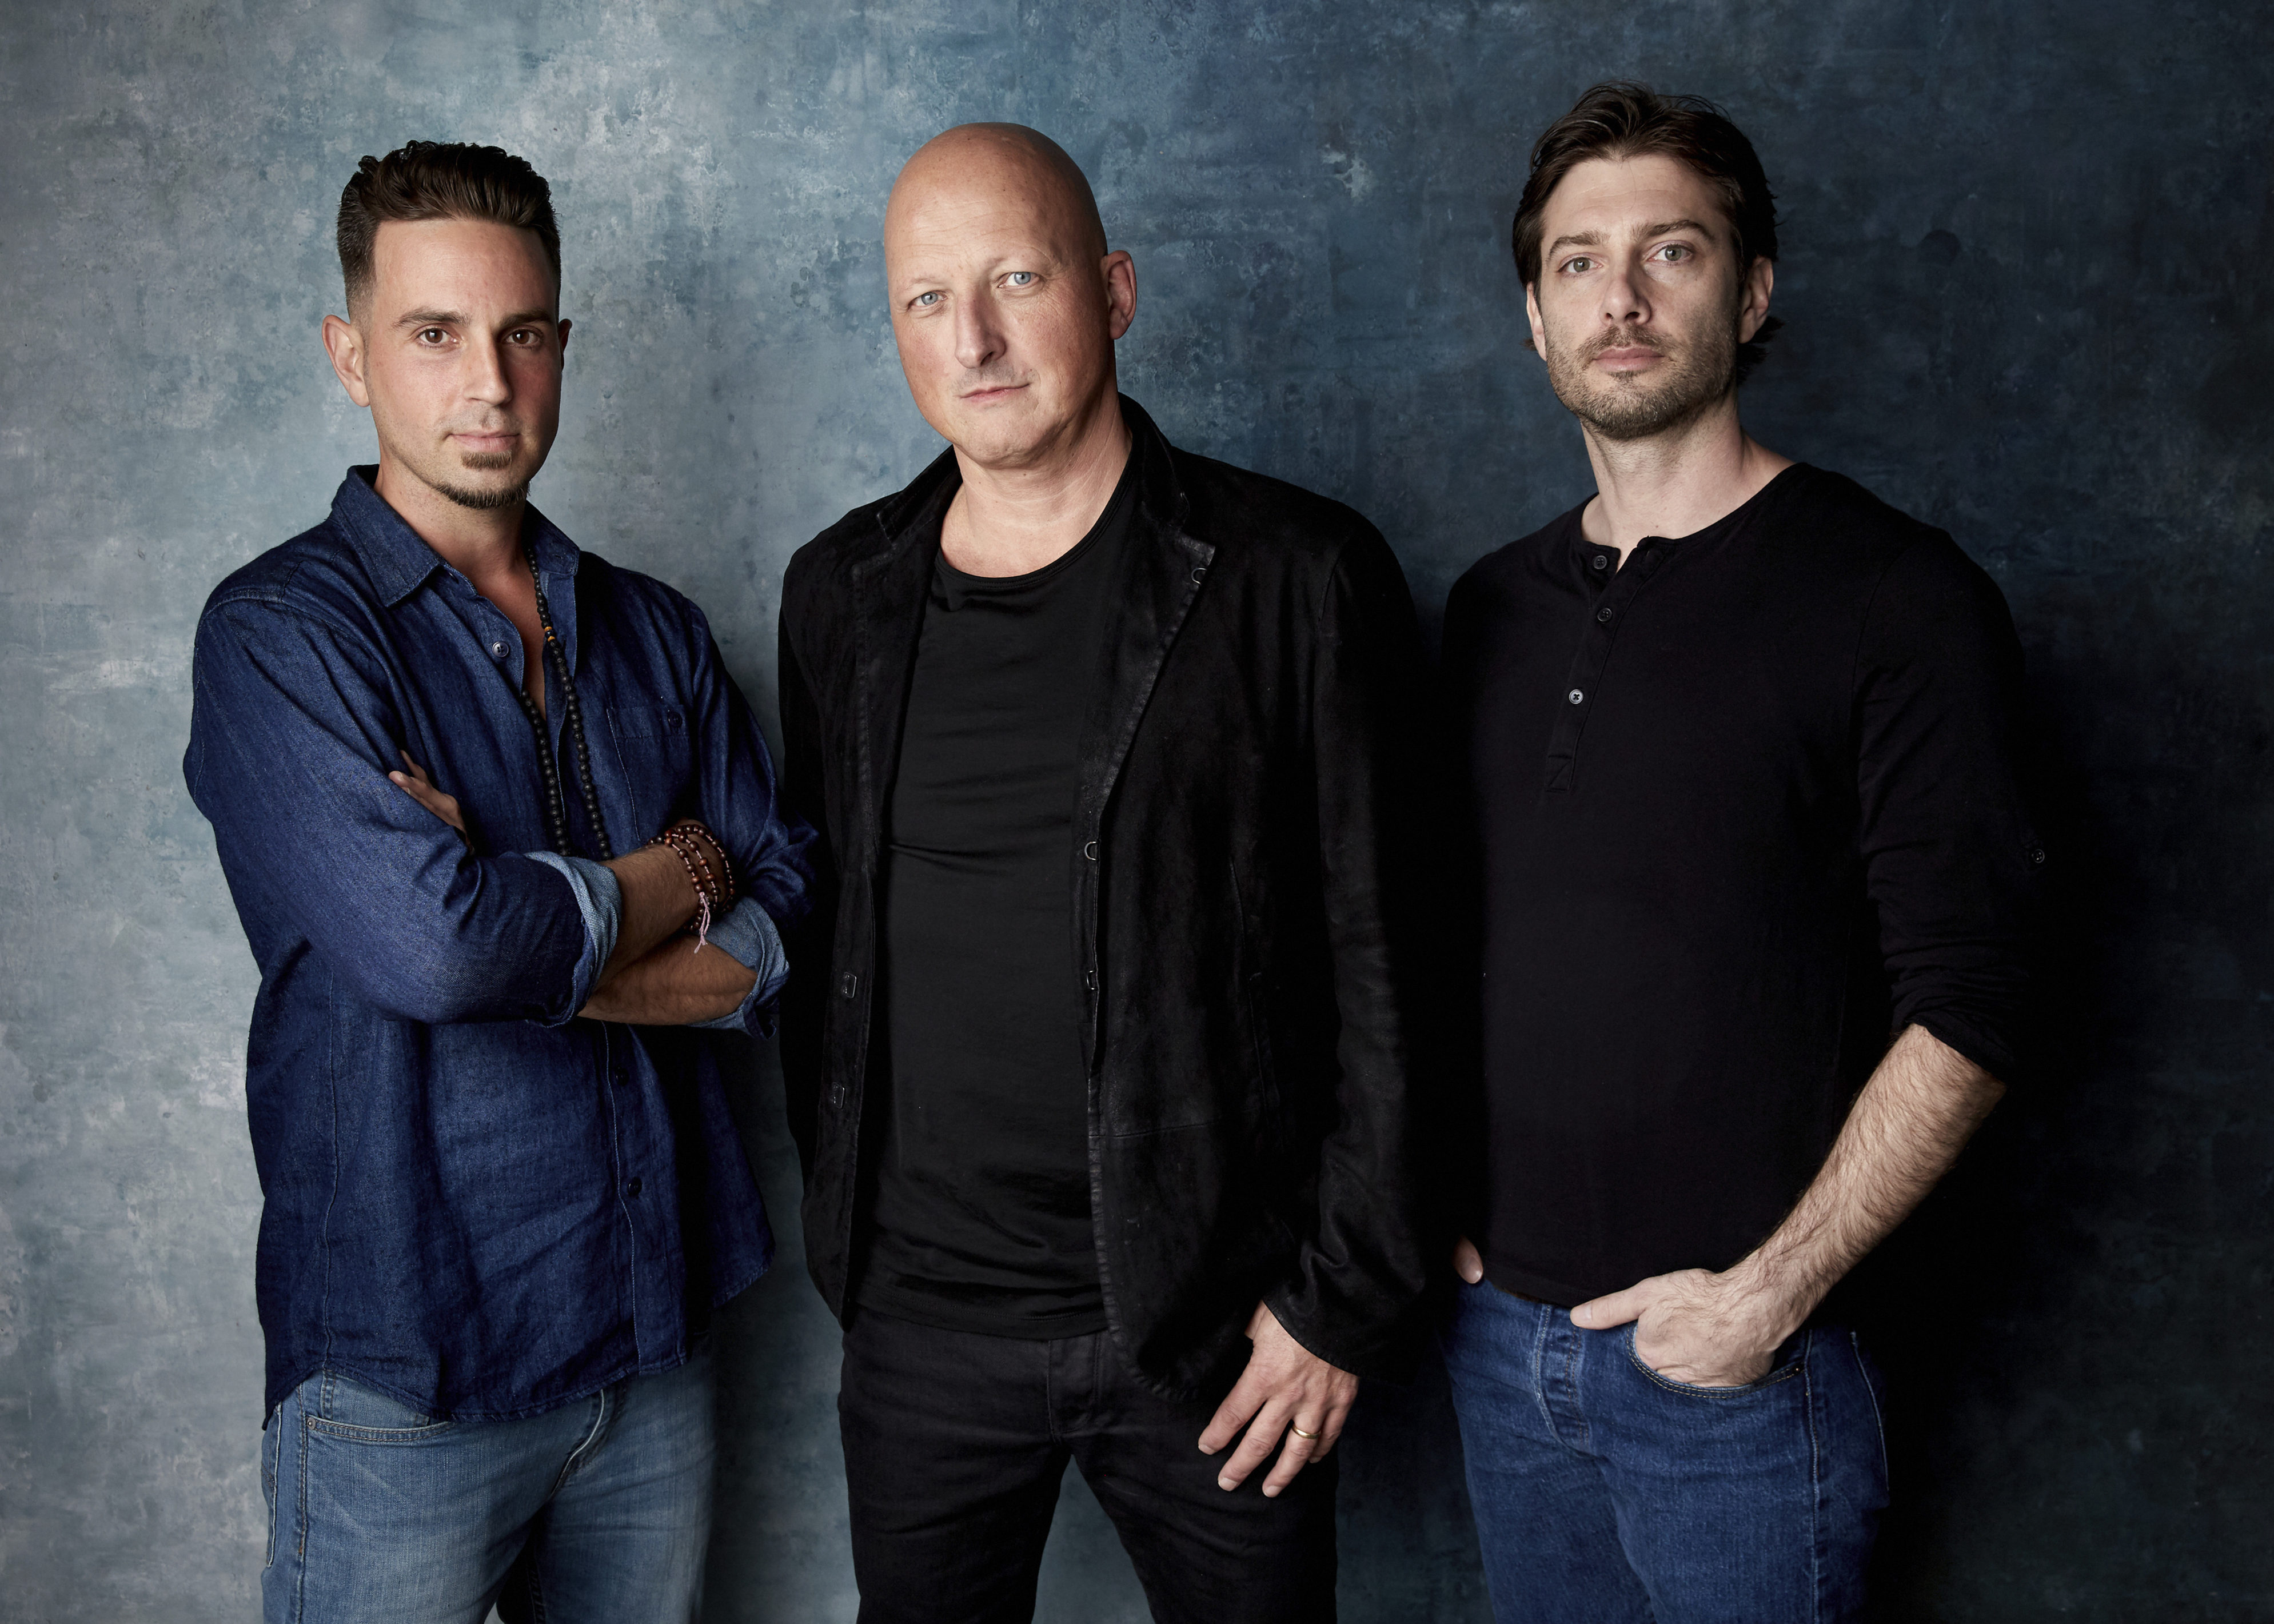 Wade Robson, from left, director Dan Reed and James Safechuck